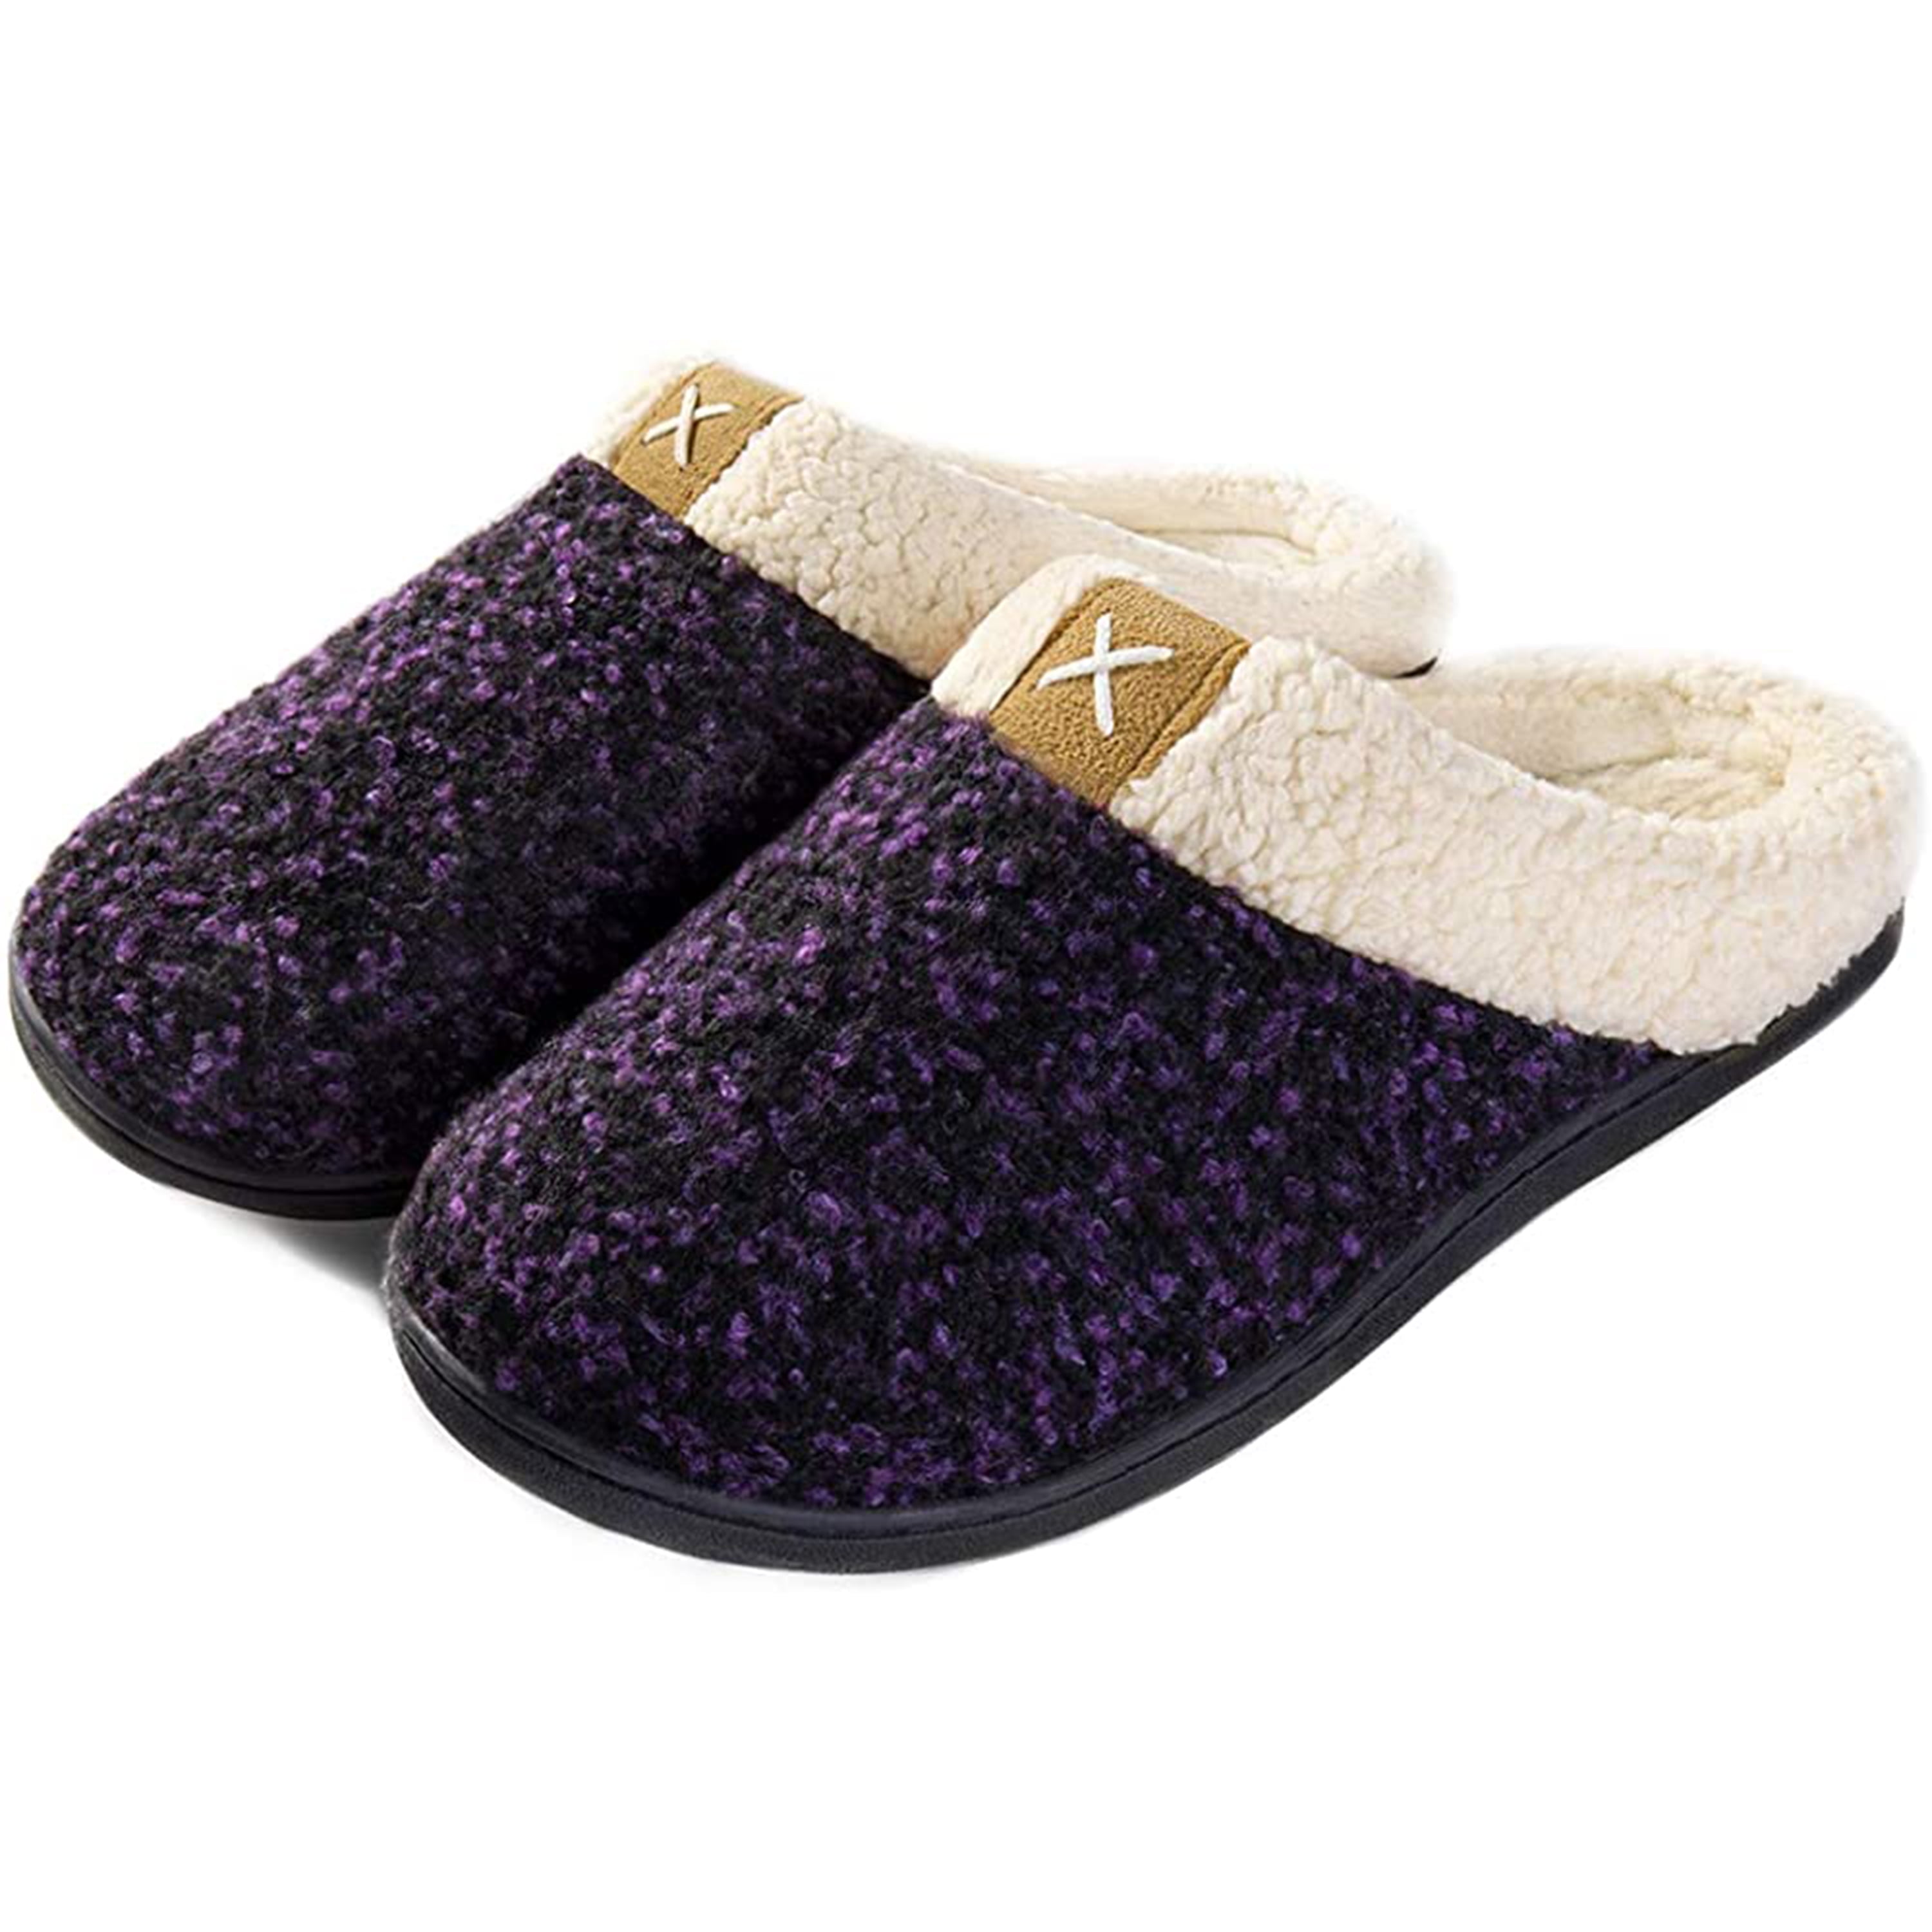 Wool-Like Blend Micro Suede House Shoes with Anti-Slip Indoor Outdoor Rubber Sole ULTRAIDEAS Womens Cozy Memory Foam Slippers with Warm Plush Faux Fur Lining 